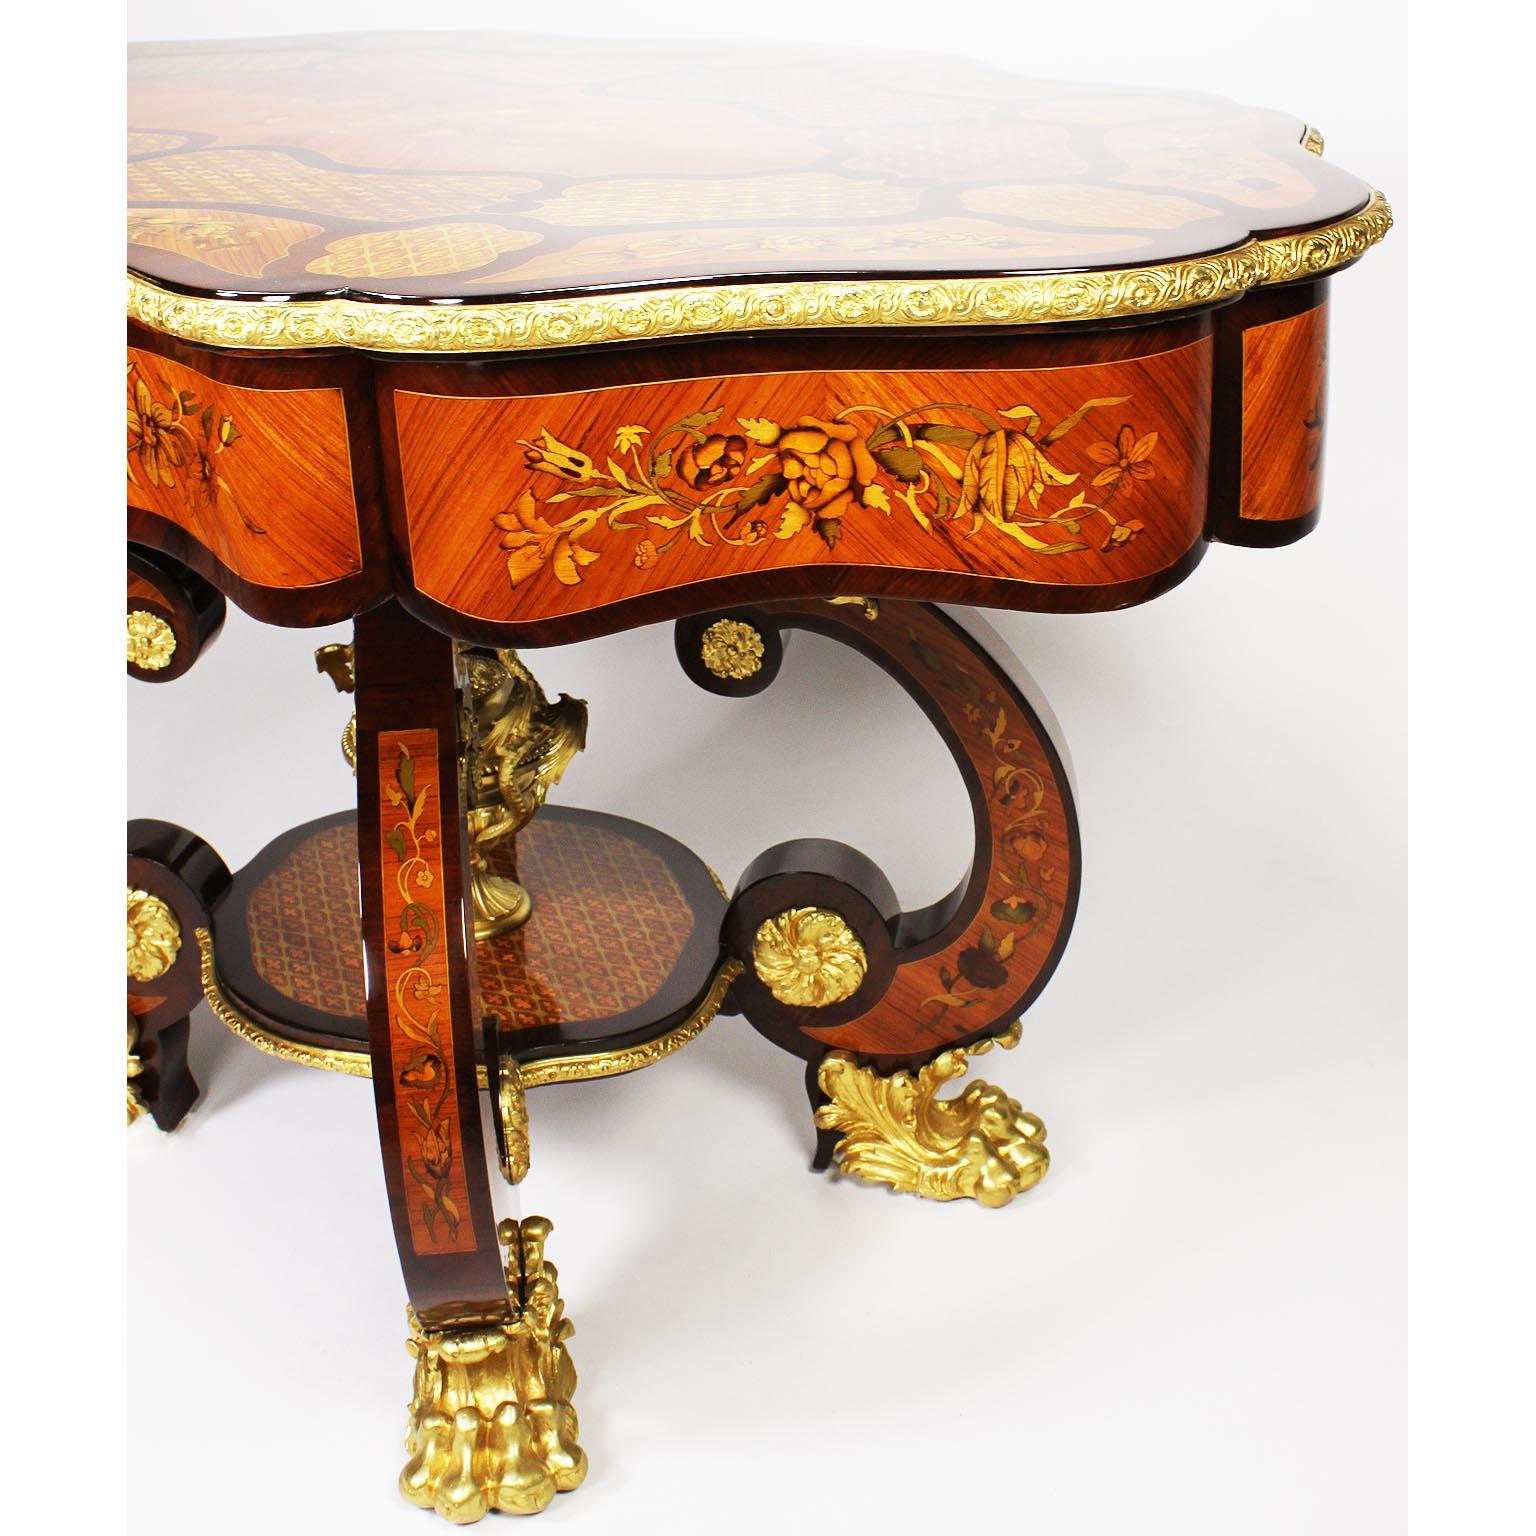 Fine Italian 19th Century Floral Marquetry Gilt Bronze-Mounted Center Table Desk For Sale 3